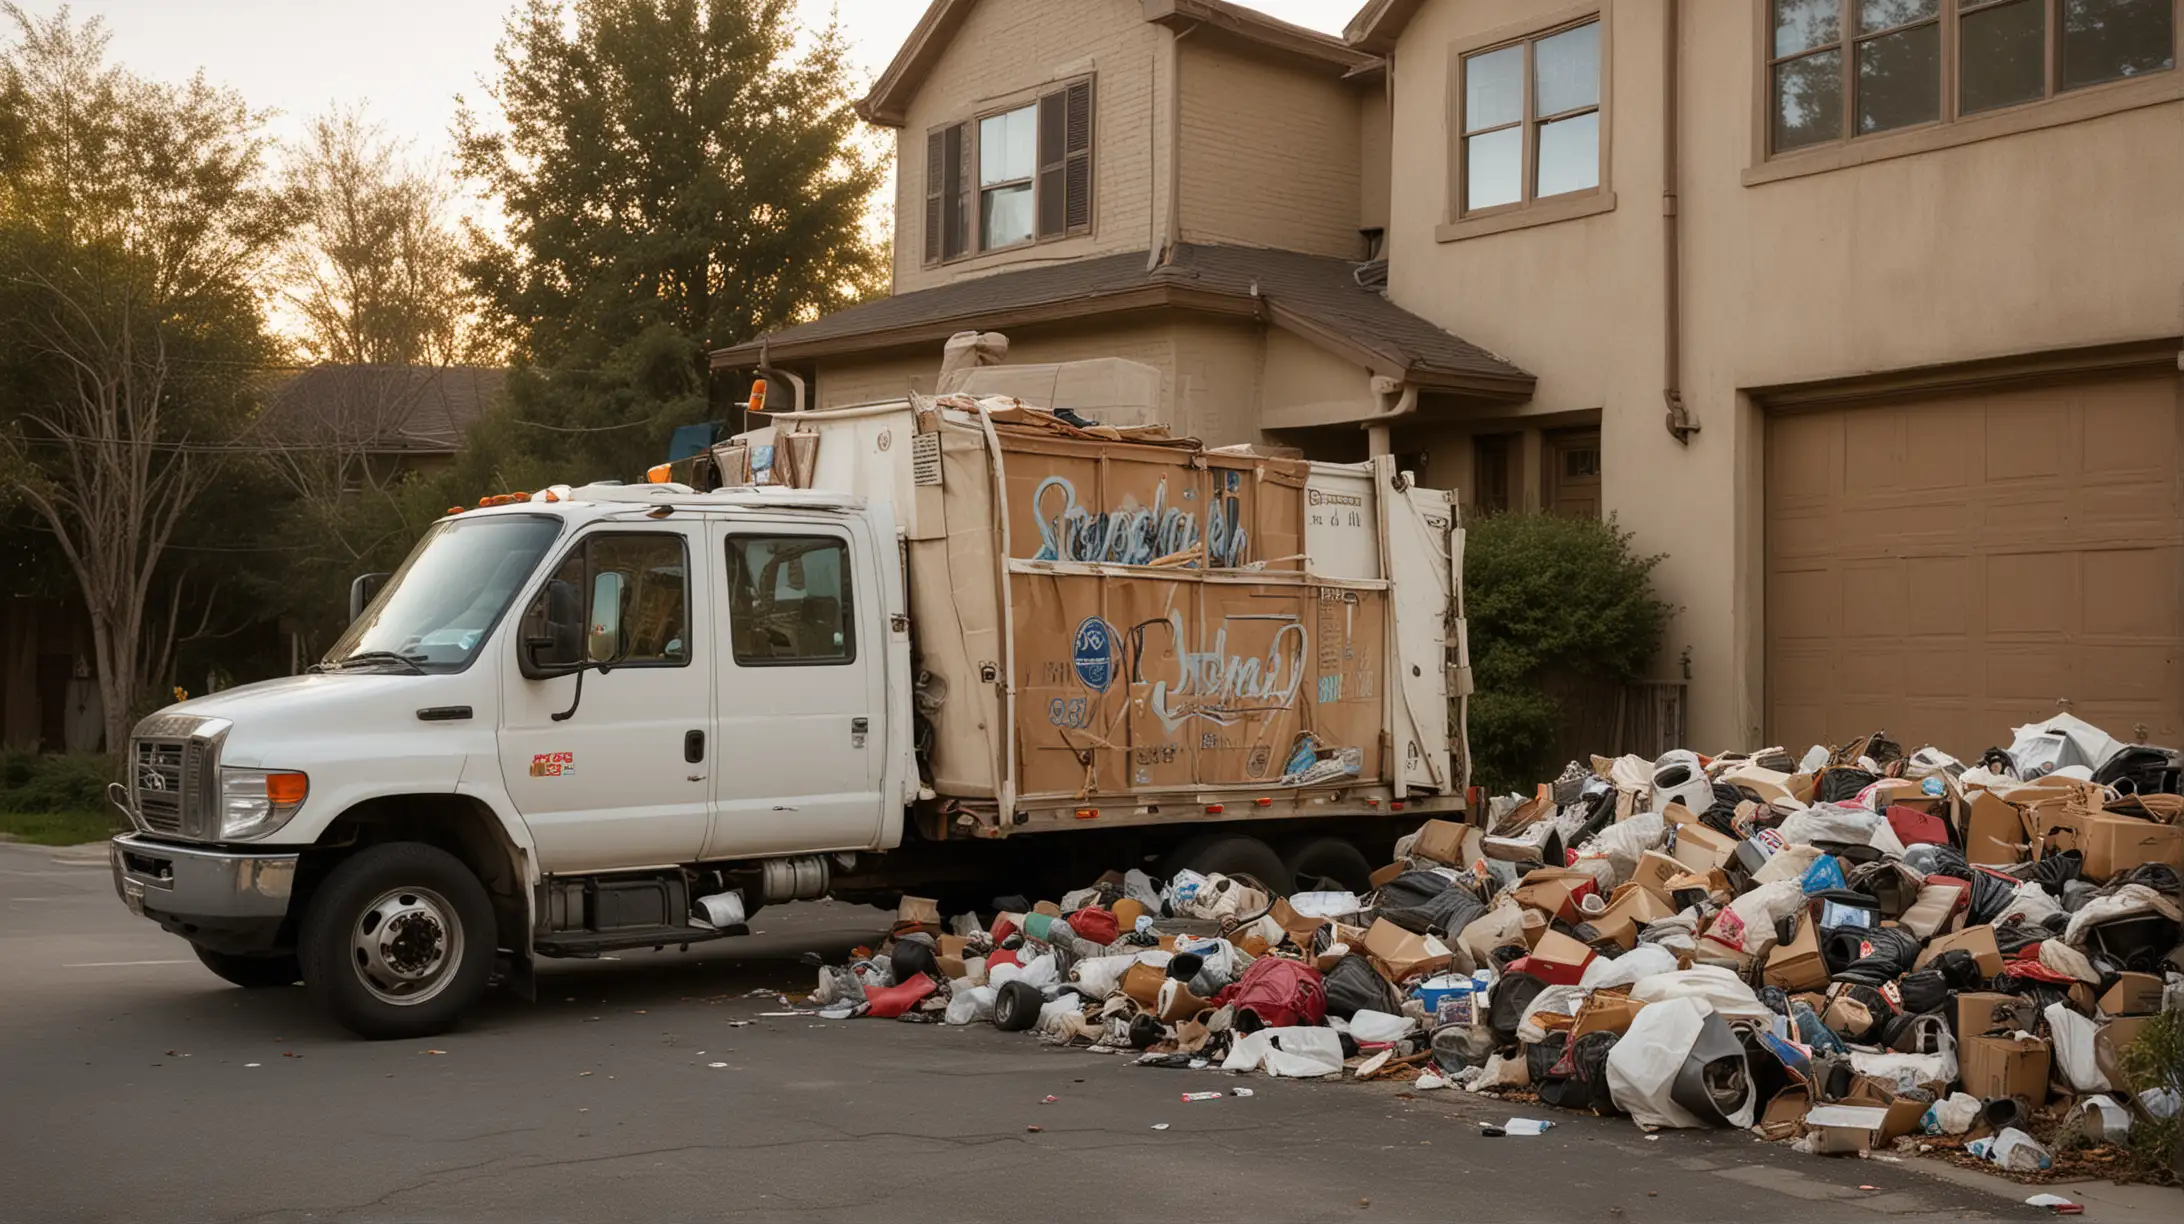 Create a high-quality photograph depicting a Route Runners Junk Removal truck fully loaded with a variety of discarded items such as furniture, appliances, and boxes. The image should capture the truck parked in front of a recently cleared property, emphasizing the volume and diversity of junk collected. The scene should convey a sense of accomplishment and readiness for disposal. Use a DSLR camera with a 24mm lens to capture a wide view of the truck and the surrounding area, showcasing the impact of the trash-out service. The photo should be taken during the golden hour to utilize soft, warm lighting that enhances the textures of the discarded items and creates a visually appealing contrast against the clean, empty space of the property.